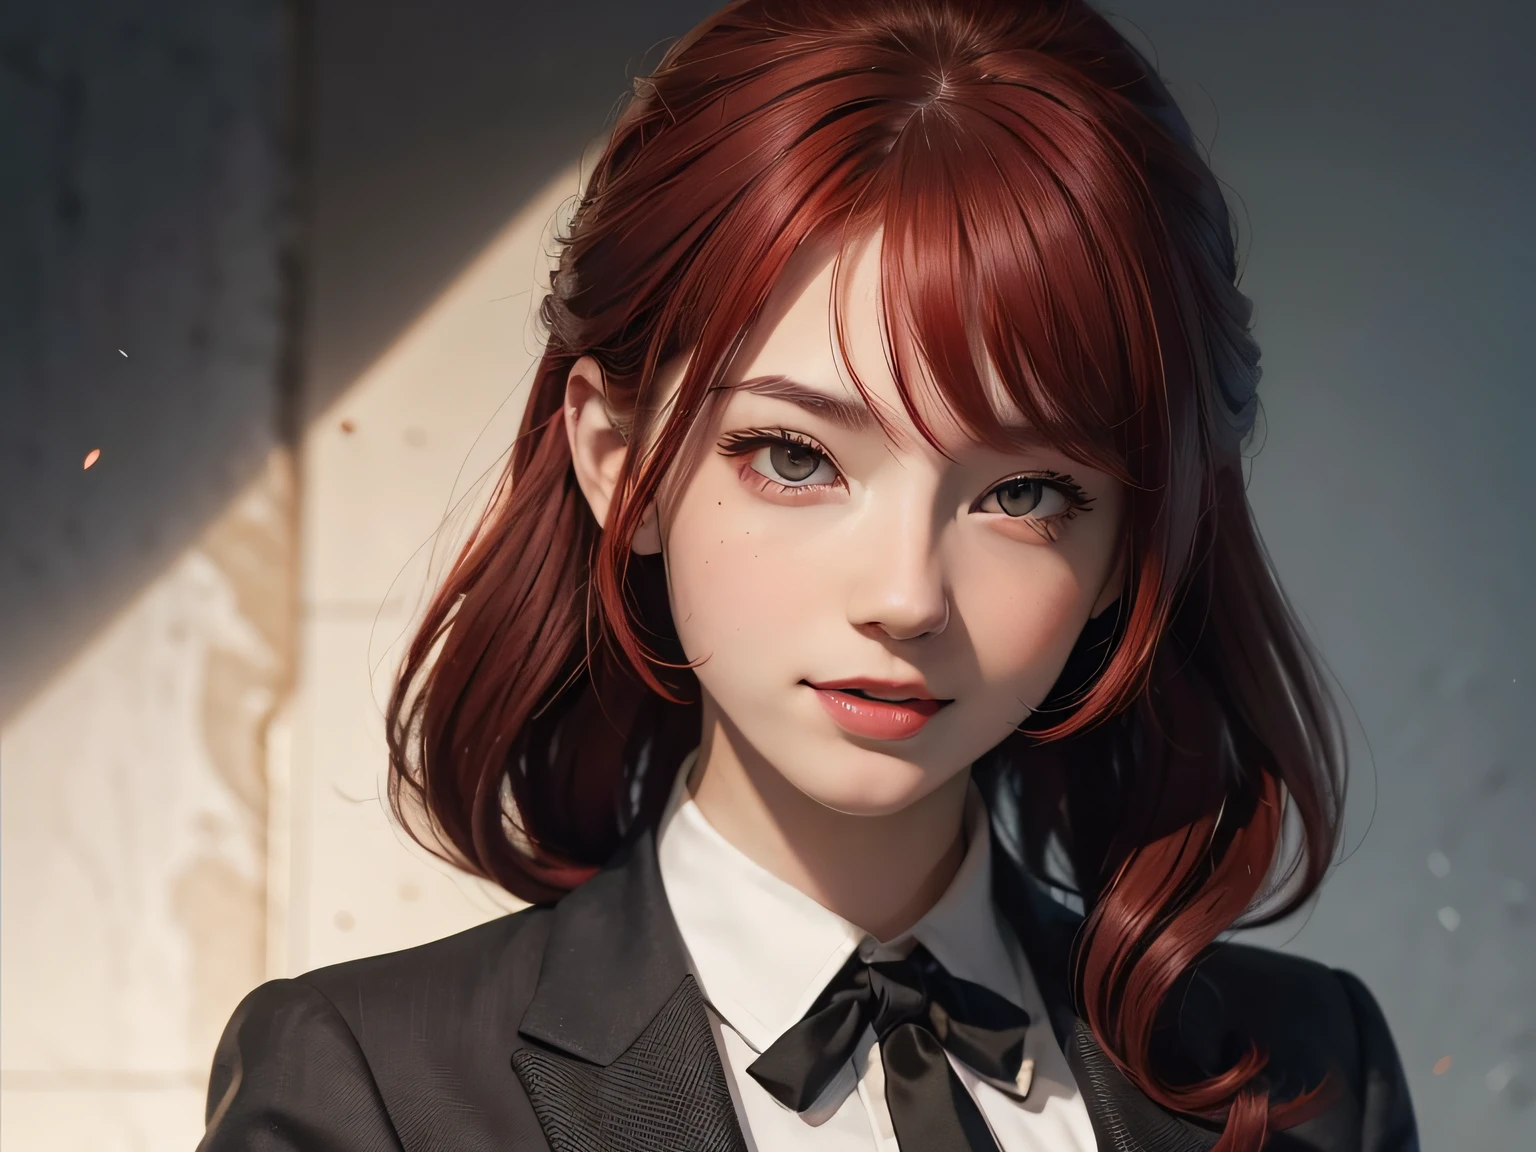 Highly detailed face with round, beautiful black eyes and joy expression, featuring red hair styled in a bang hairstyle. The character is wearing a white shirt and black tie, indicating a formal attire. Age of the character is 20 and there is only one girl depicted in the scene. Prominence should be given to showcasing the perfect body of the character.